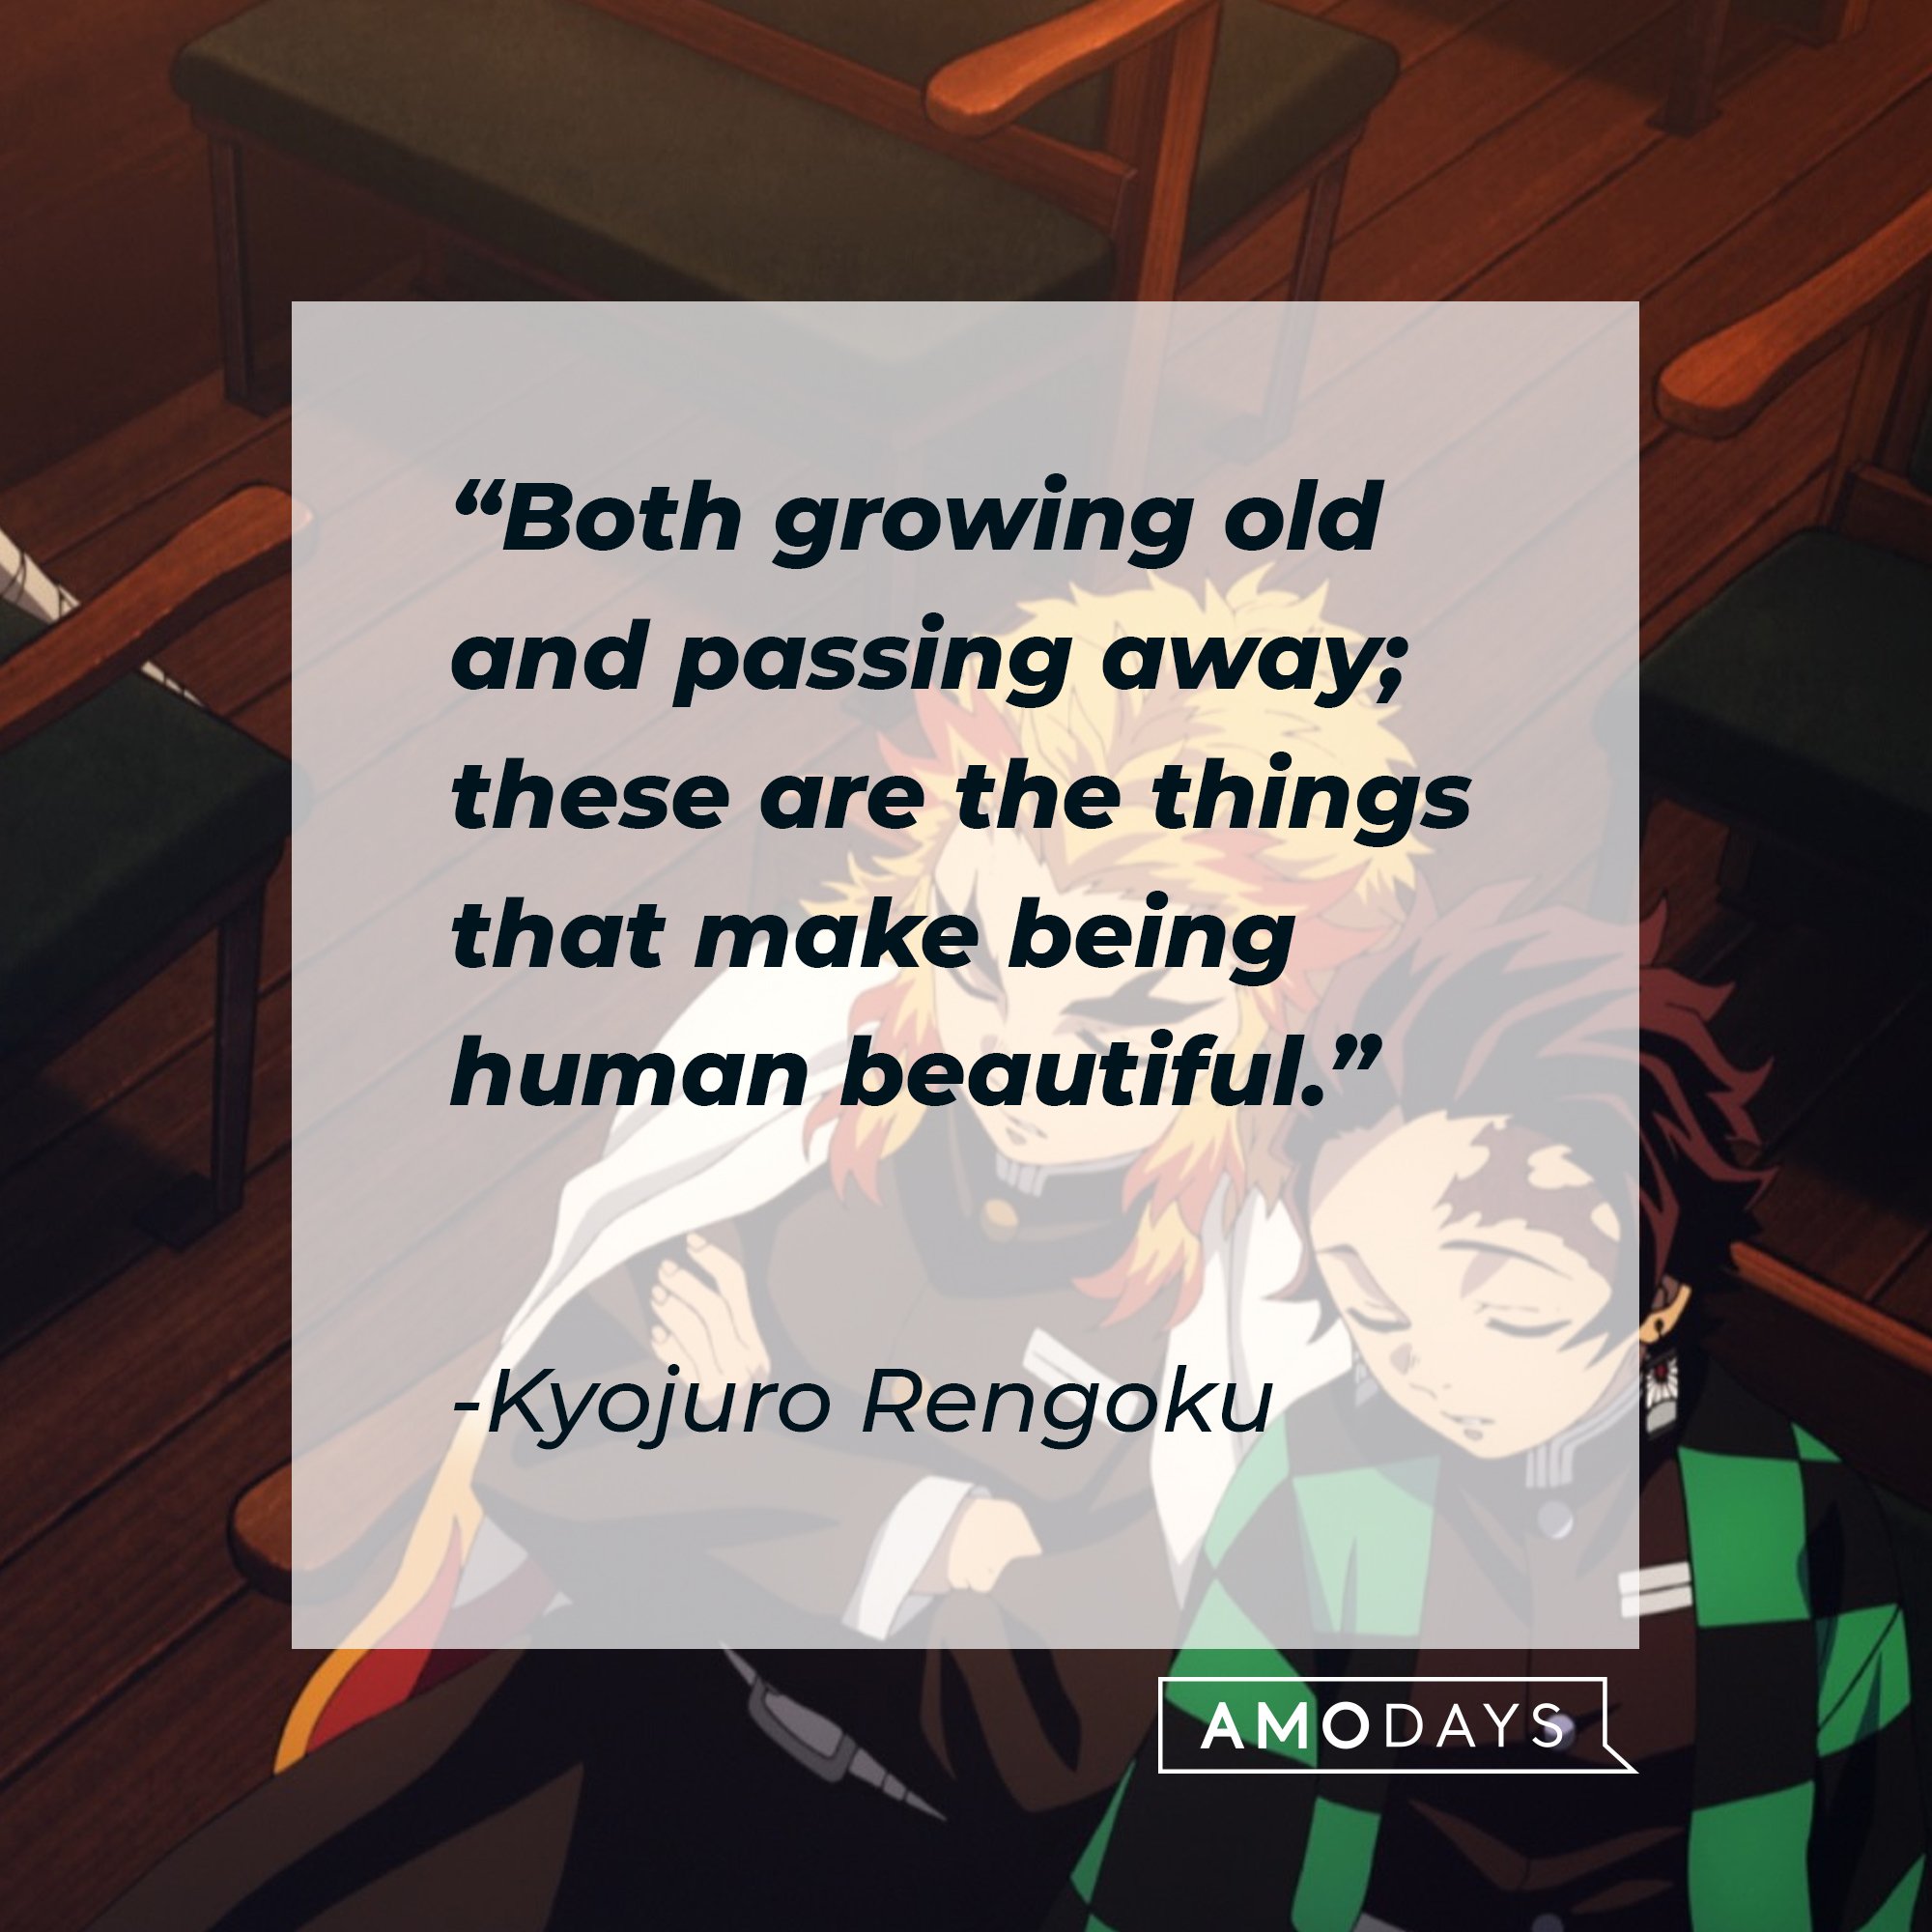 Kyojuro Rengoku’s quote: “Both growing old and passing away; these are the things that make being human beautiful.” | Image: AmoDays